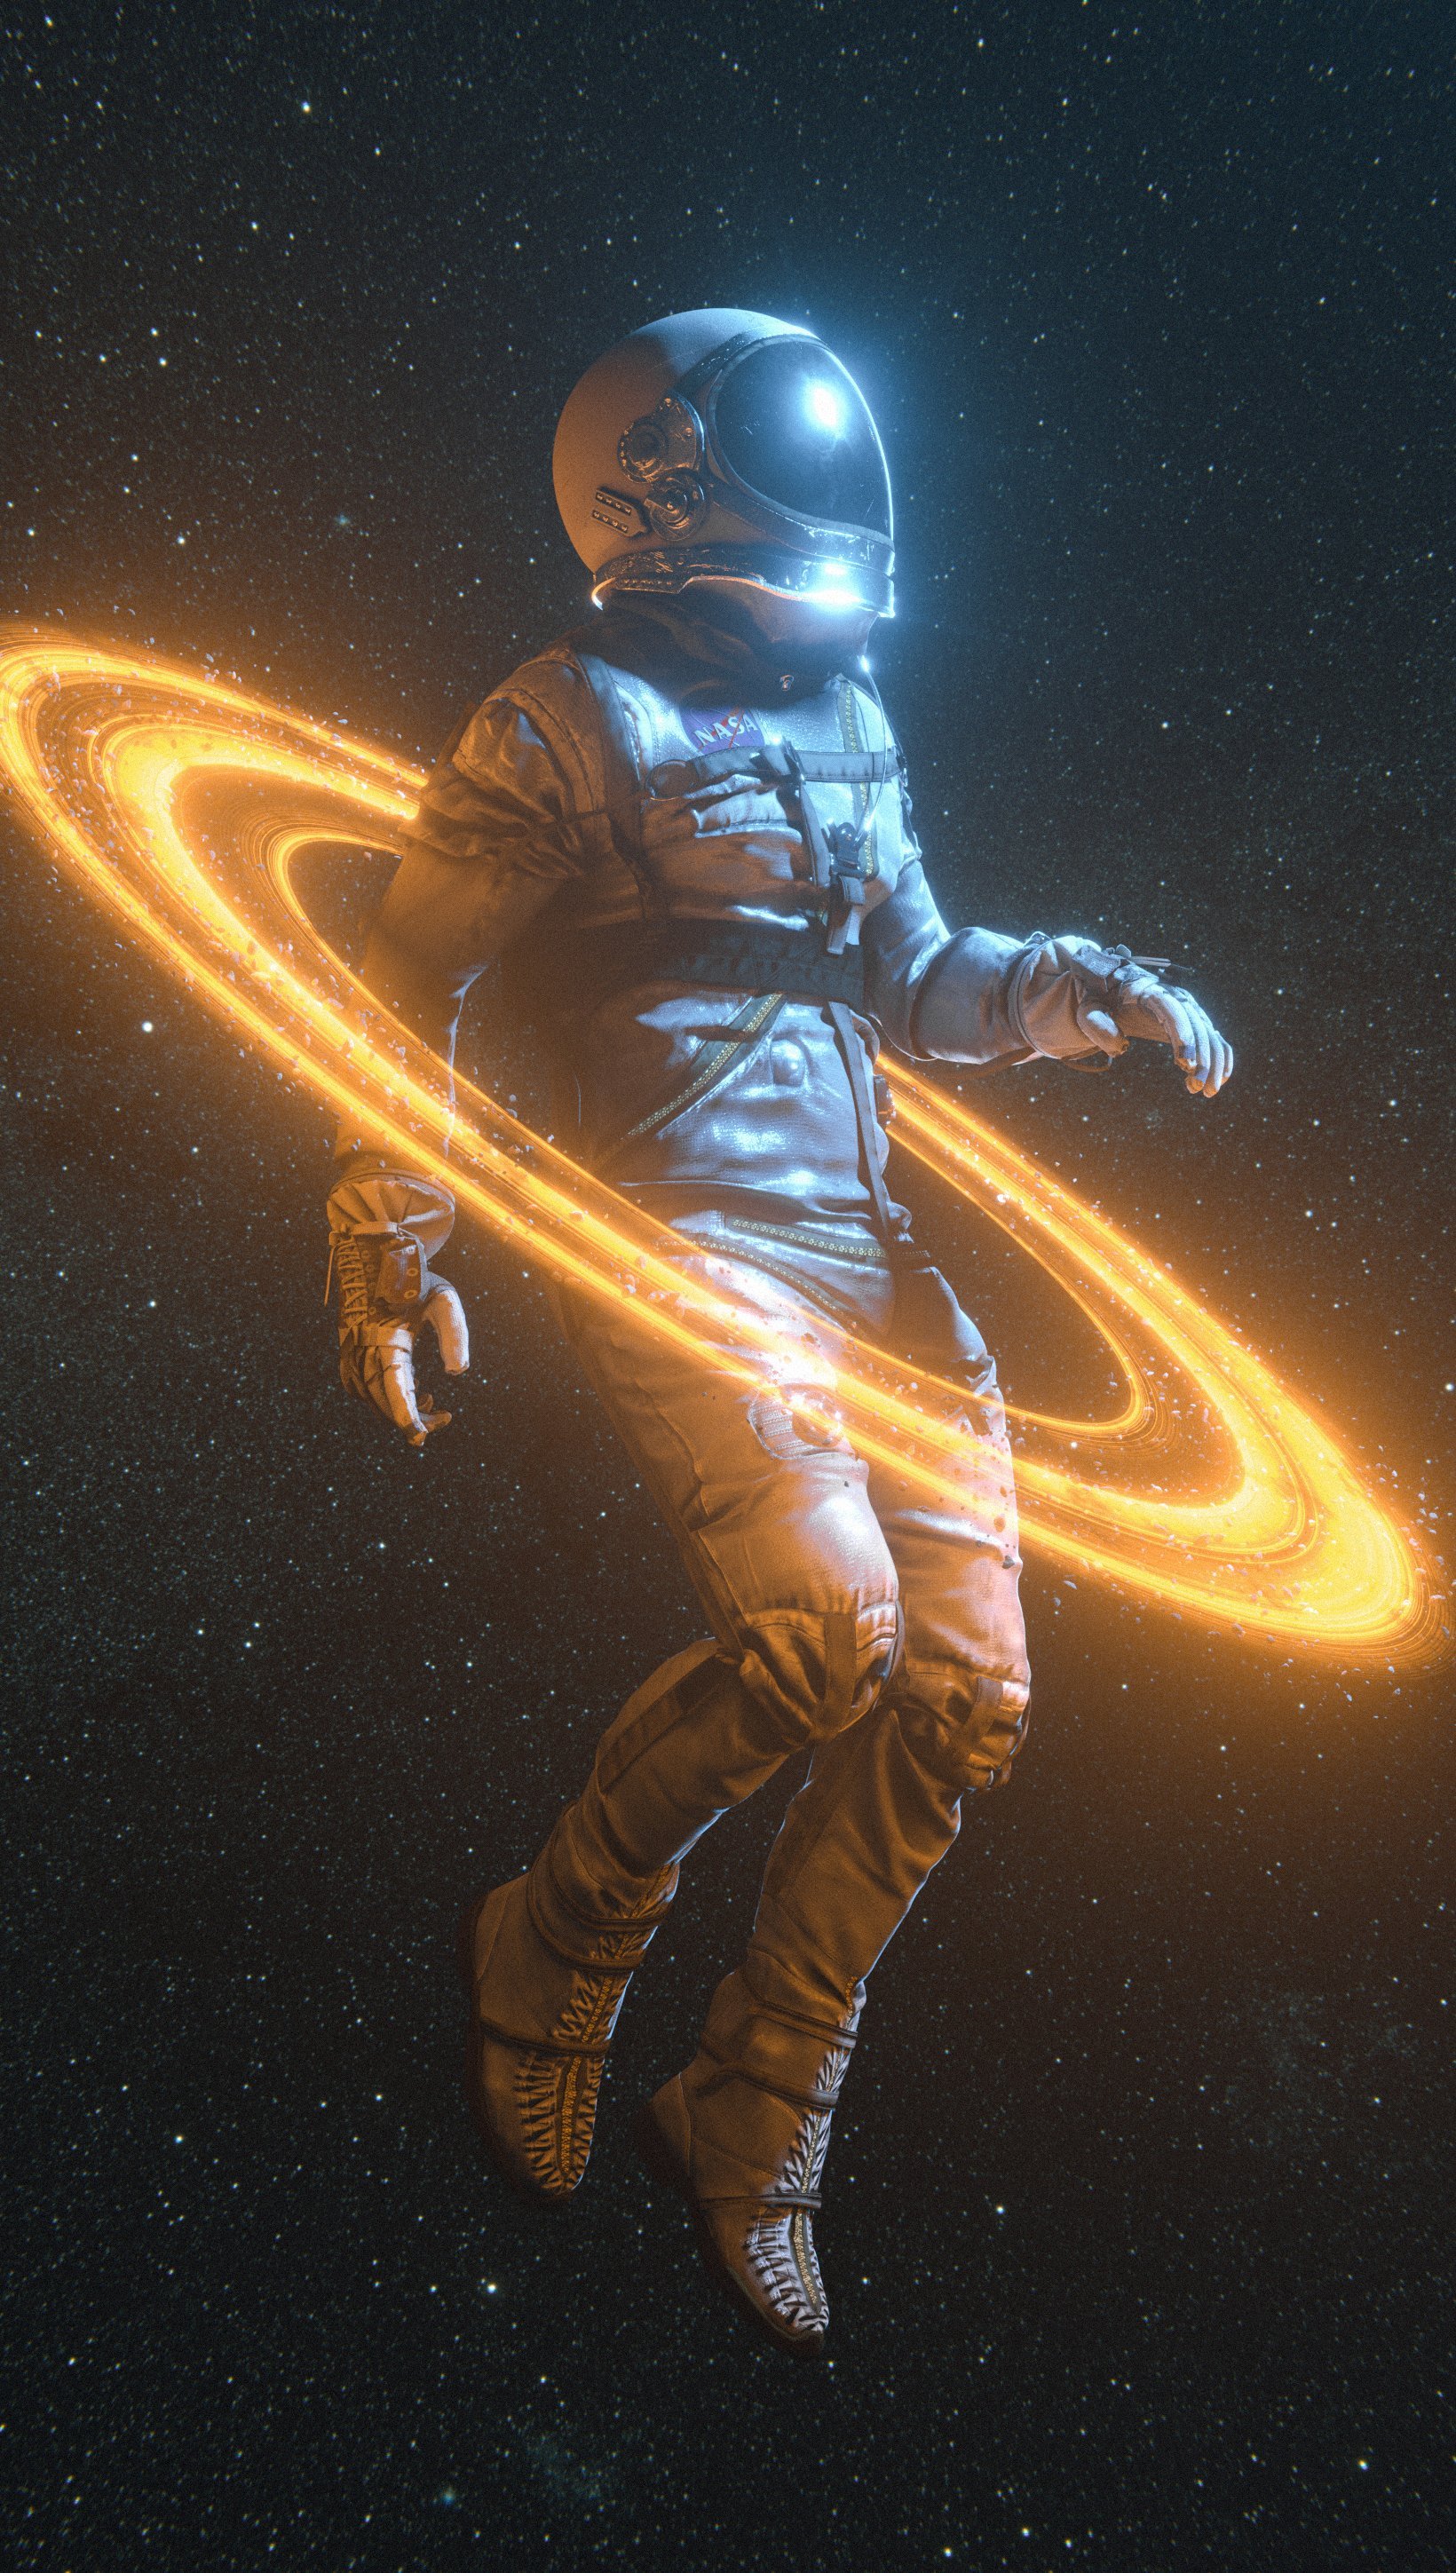 Wallpaper Astronaut surrounded by rings Vertical